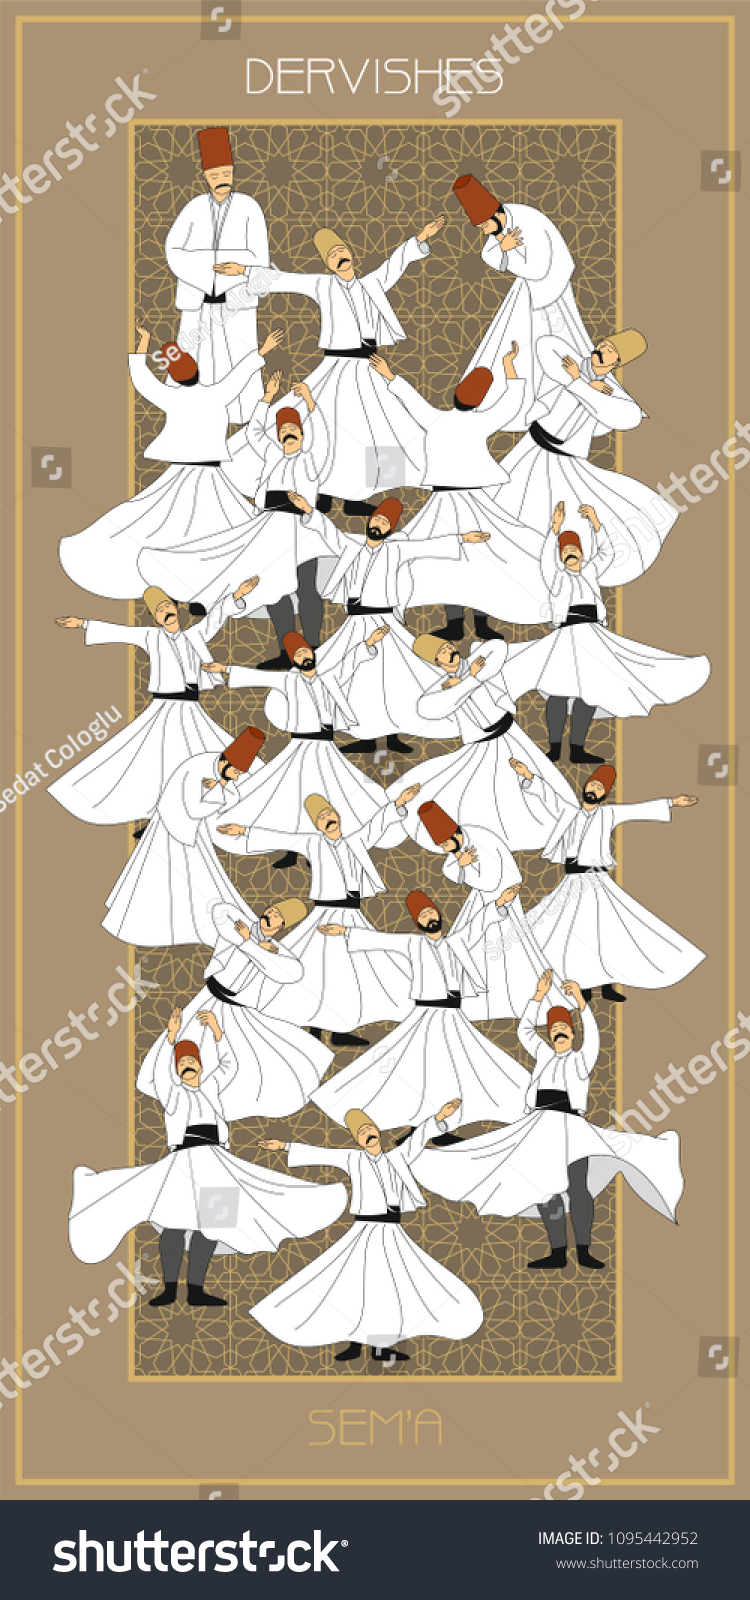 stock-vector-sema-is-a-ritual-of-mevlevi-belief-mevlevihane-mevlevi-house-is-where-these-ceremonies-took-1095442952